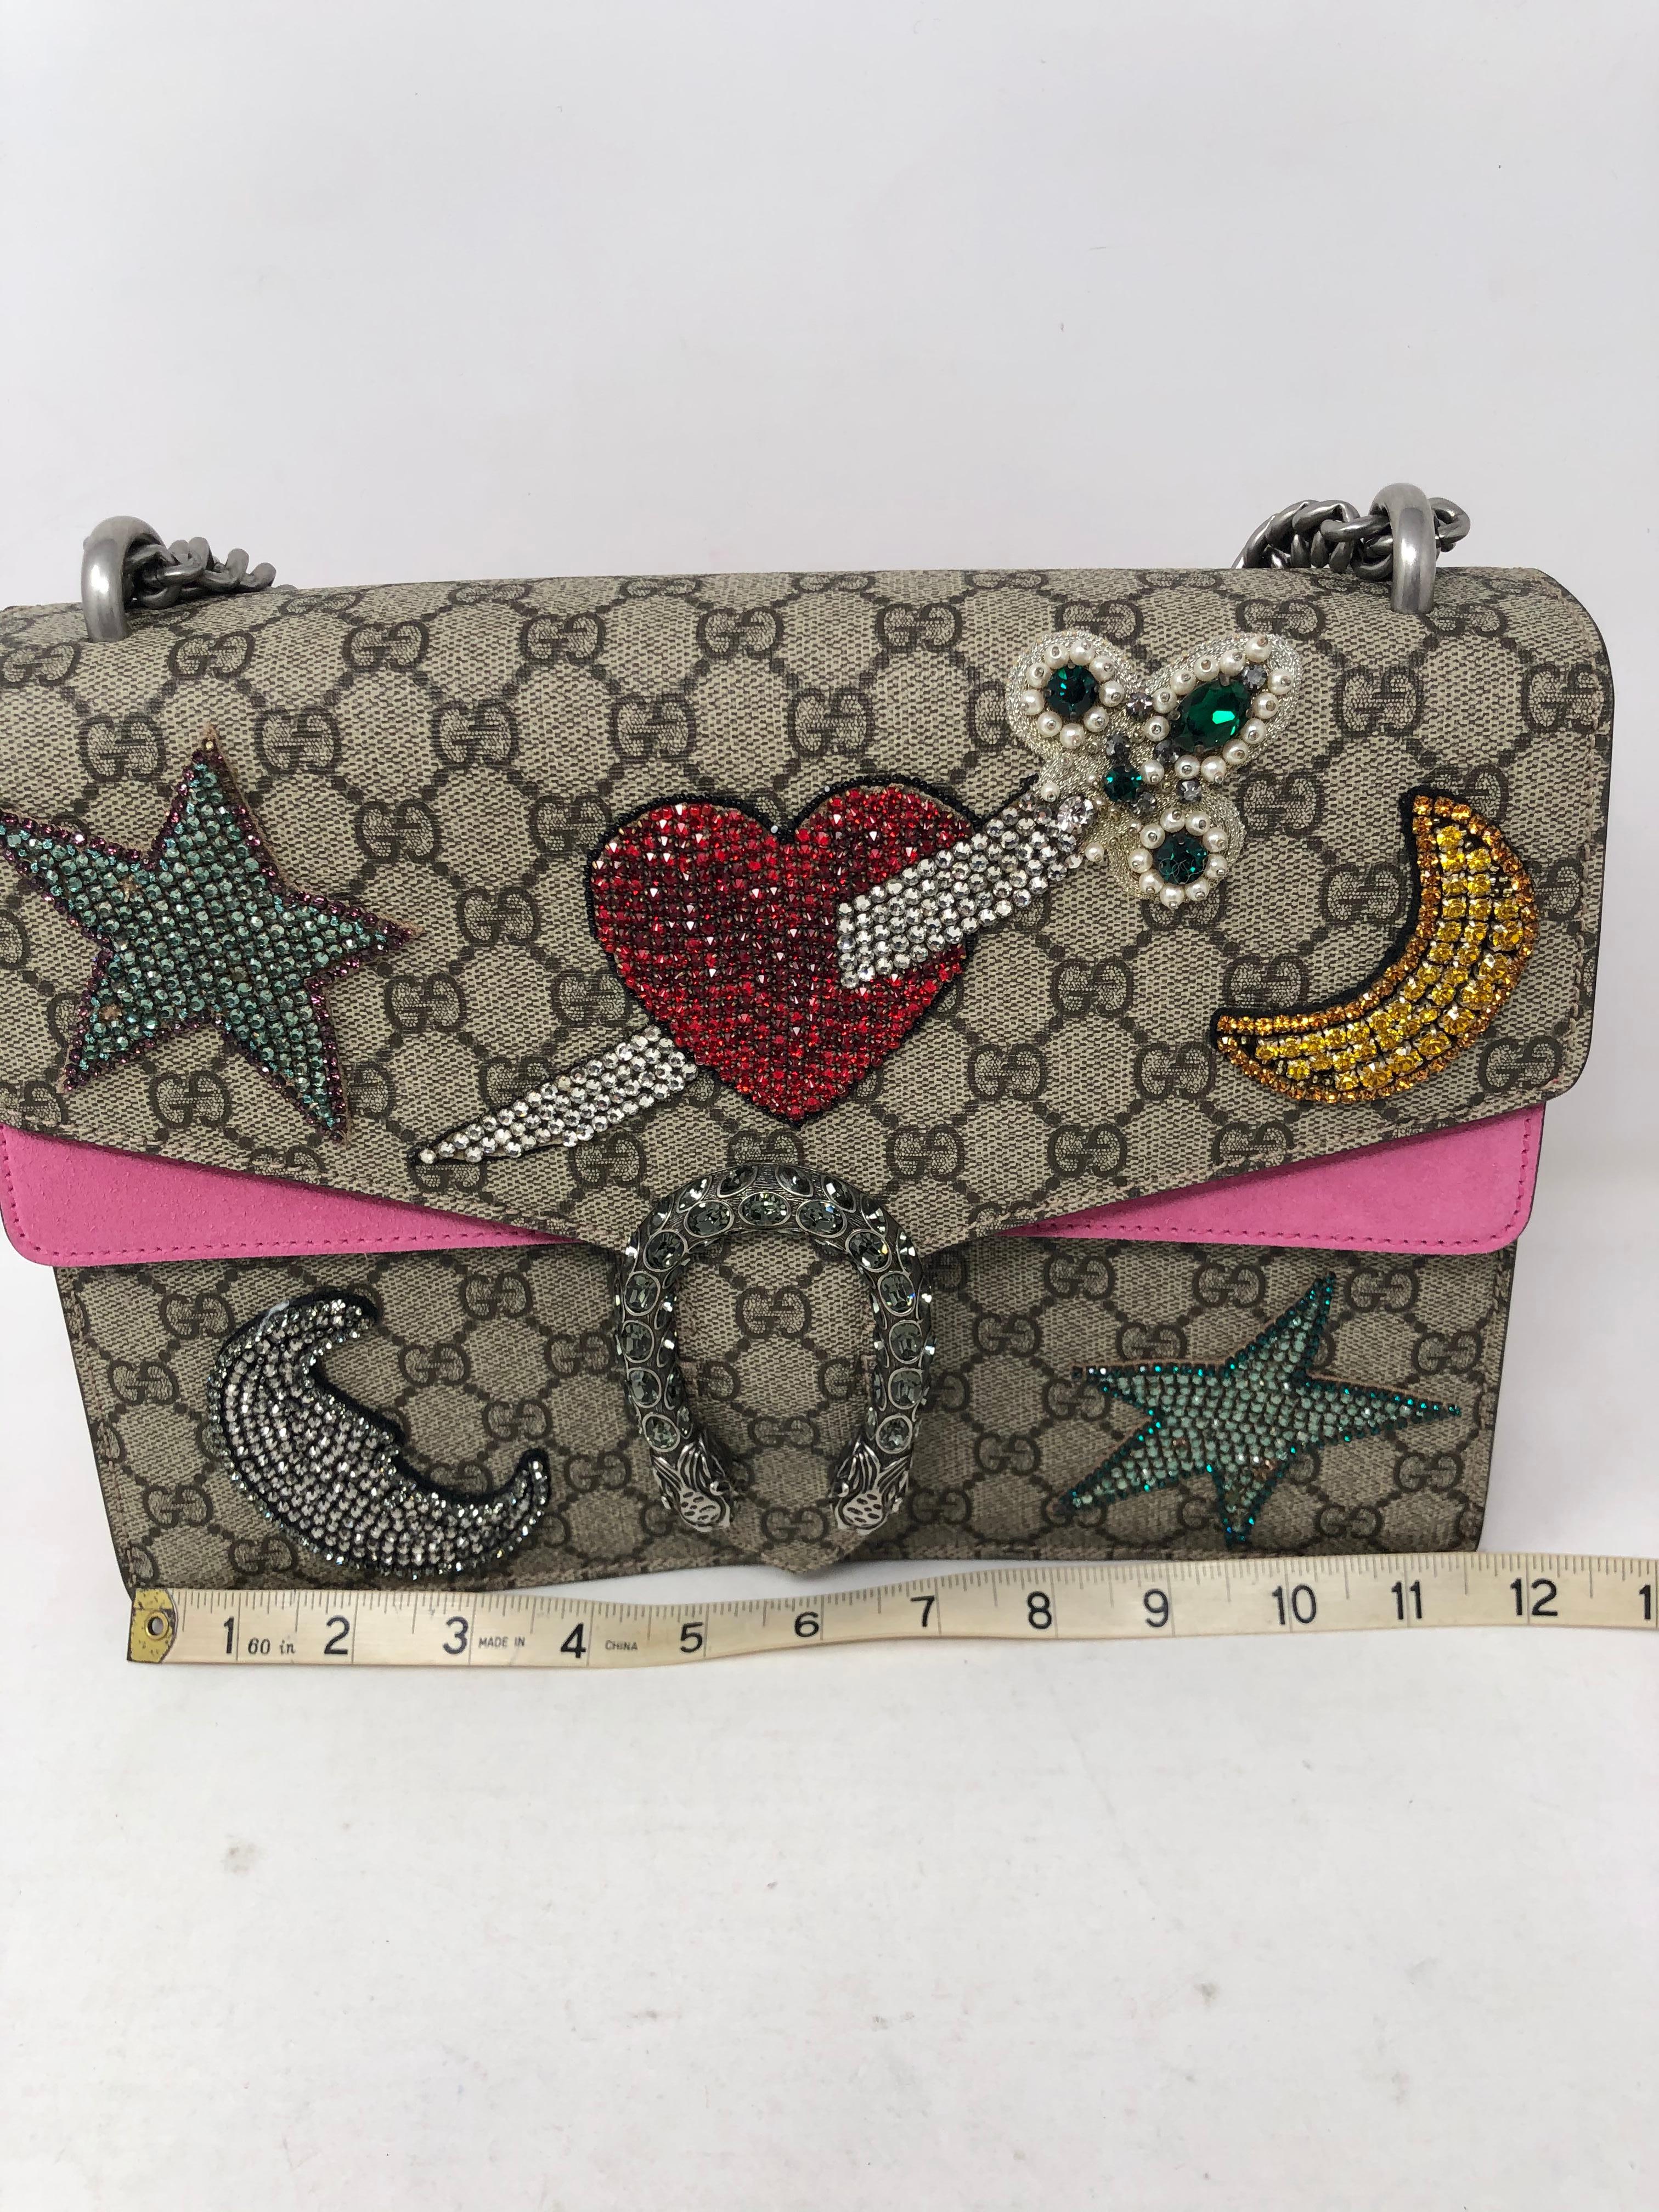 Gucci Dionysus Star, Heart, and Moon Bag  5